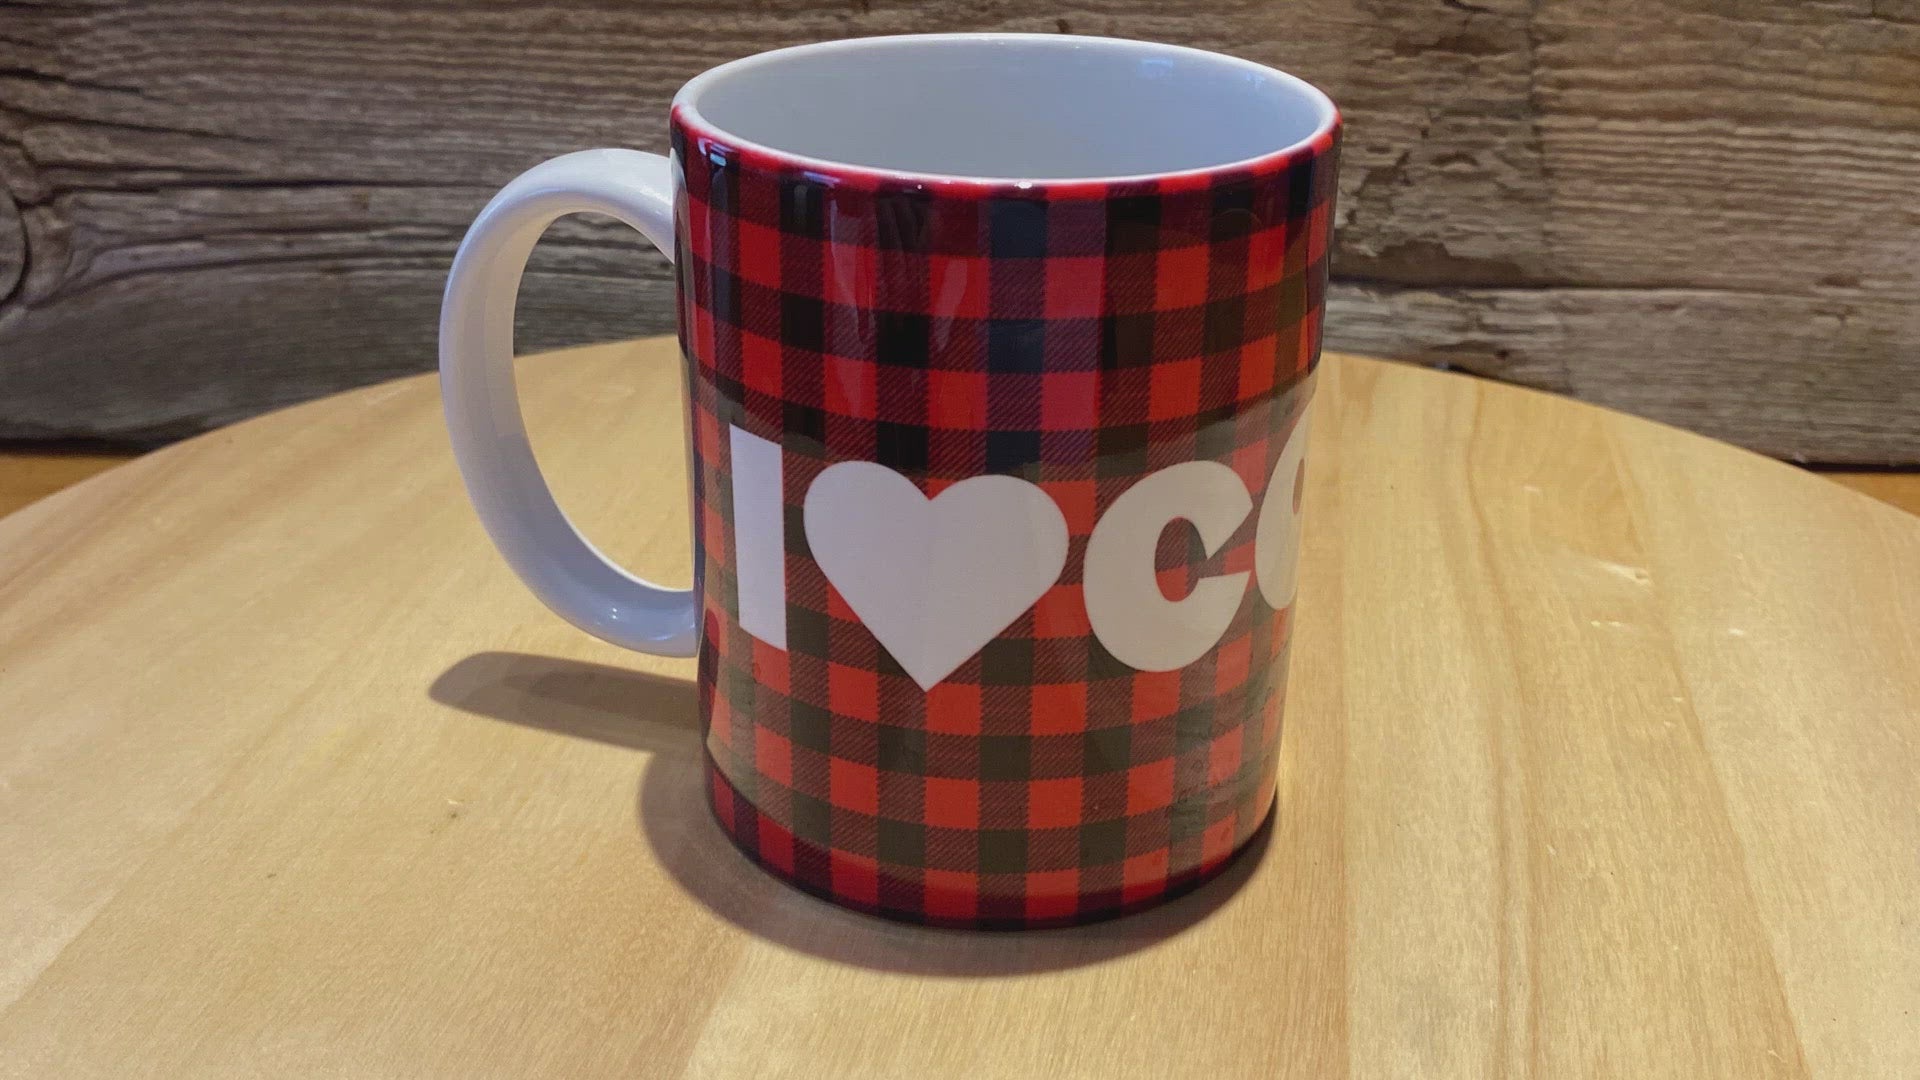 A quick video of our 'I Heart Coffee' ceramic 12 oz Glampy mug.  It is spinning slowly so that the words "I Heart Coffee" can be read.  The words are printed in white on a buffalo check (red and black) background.